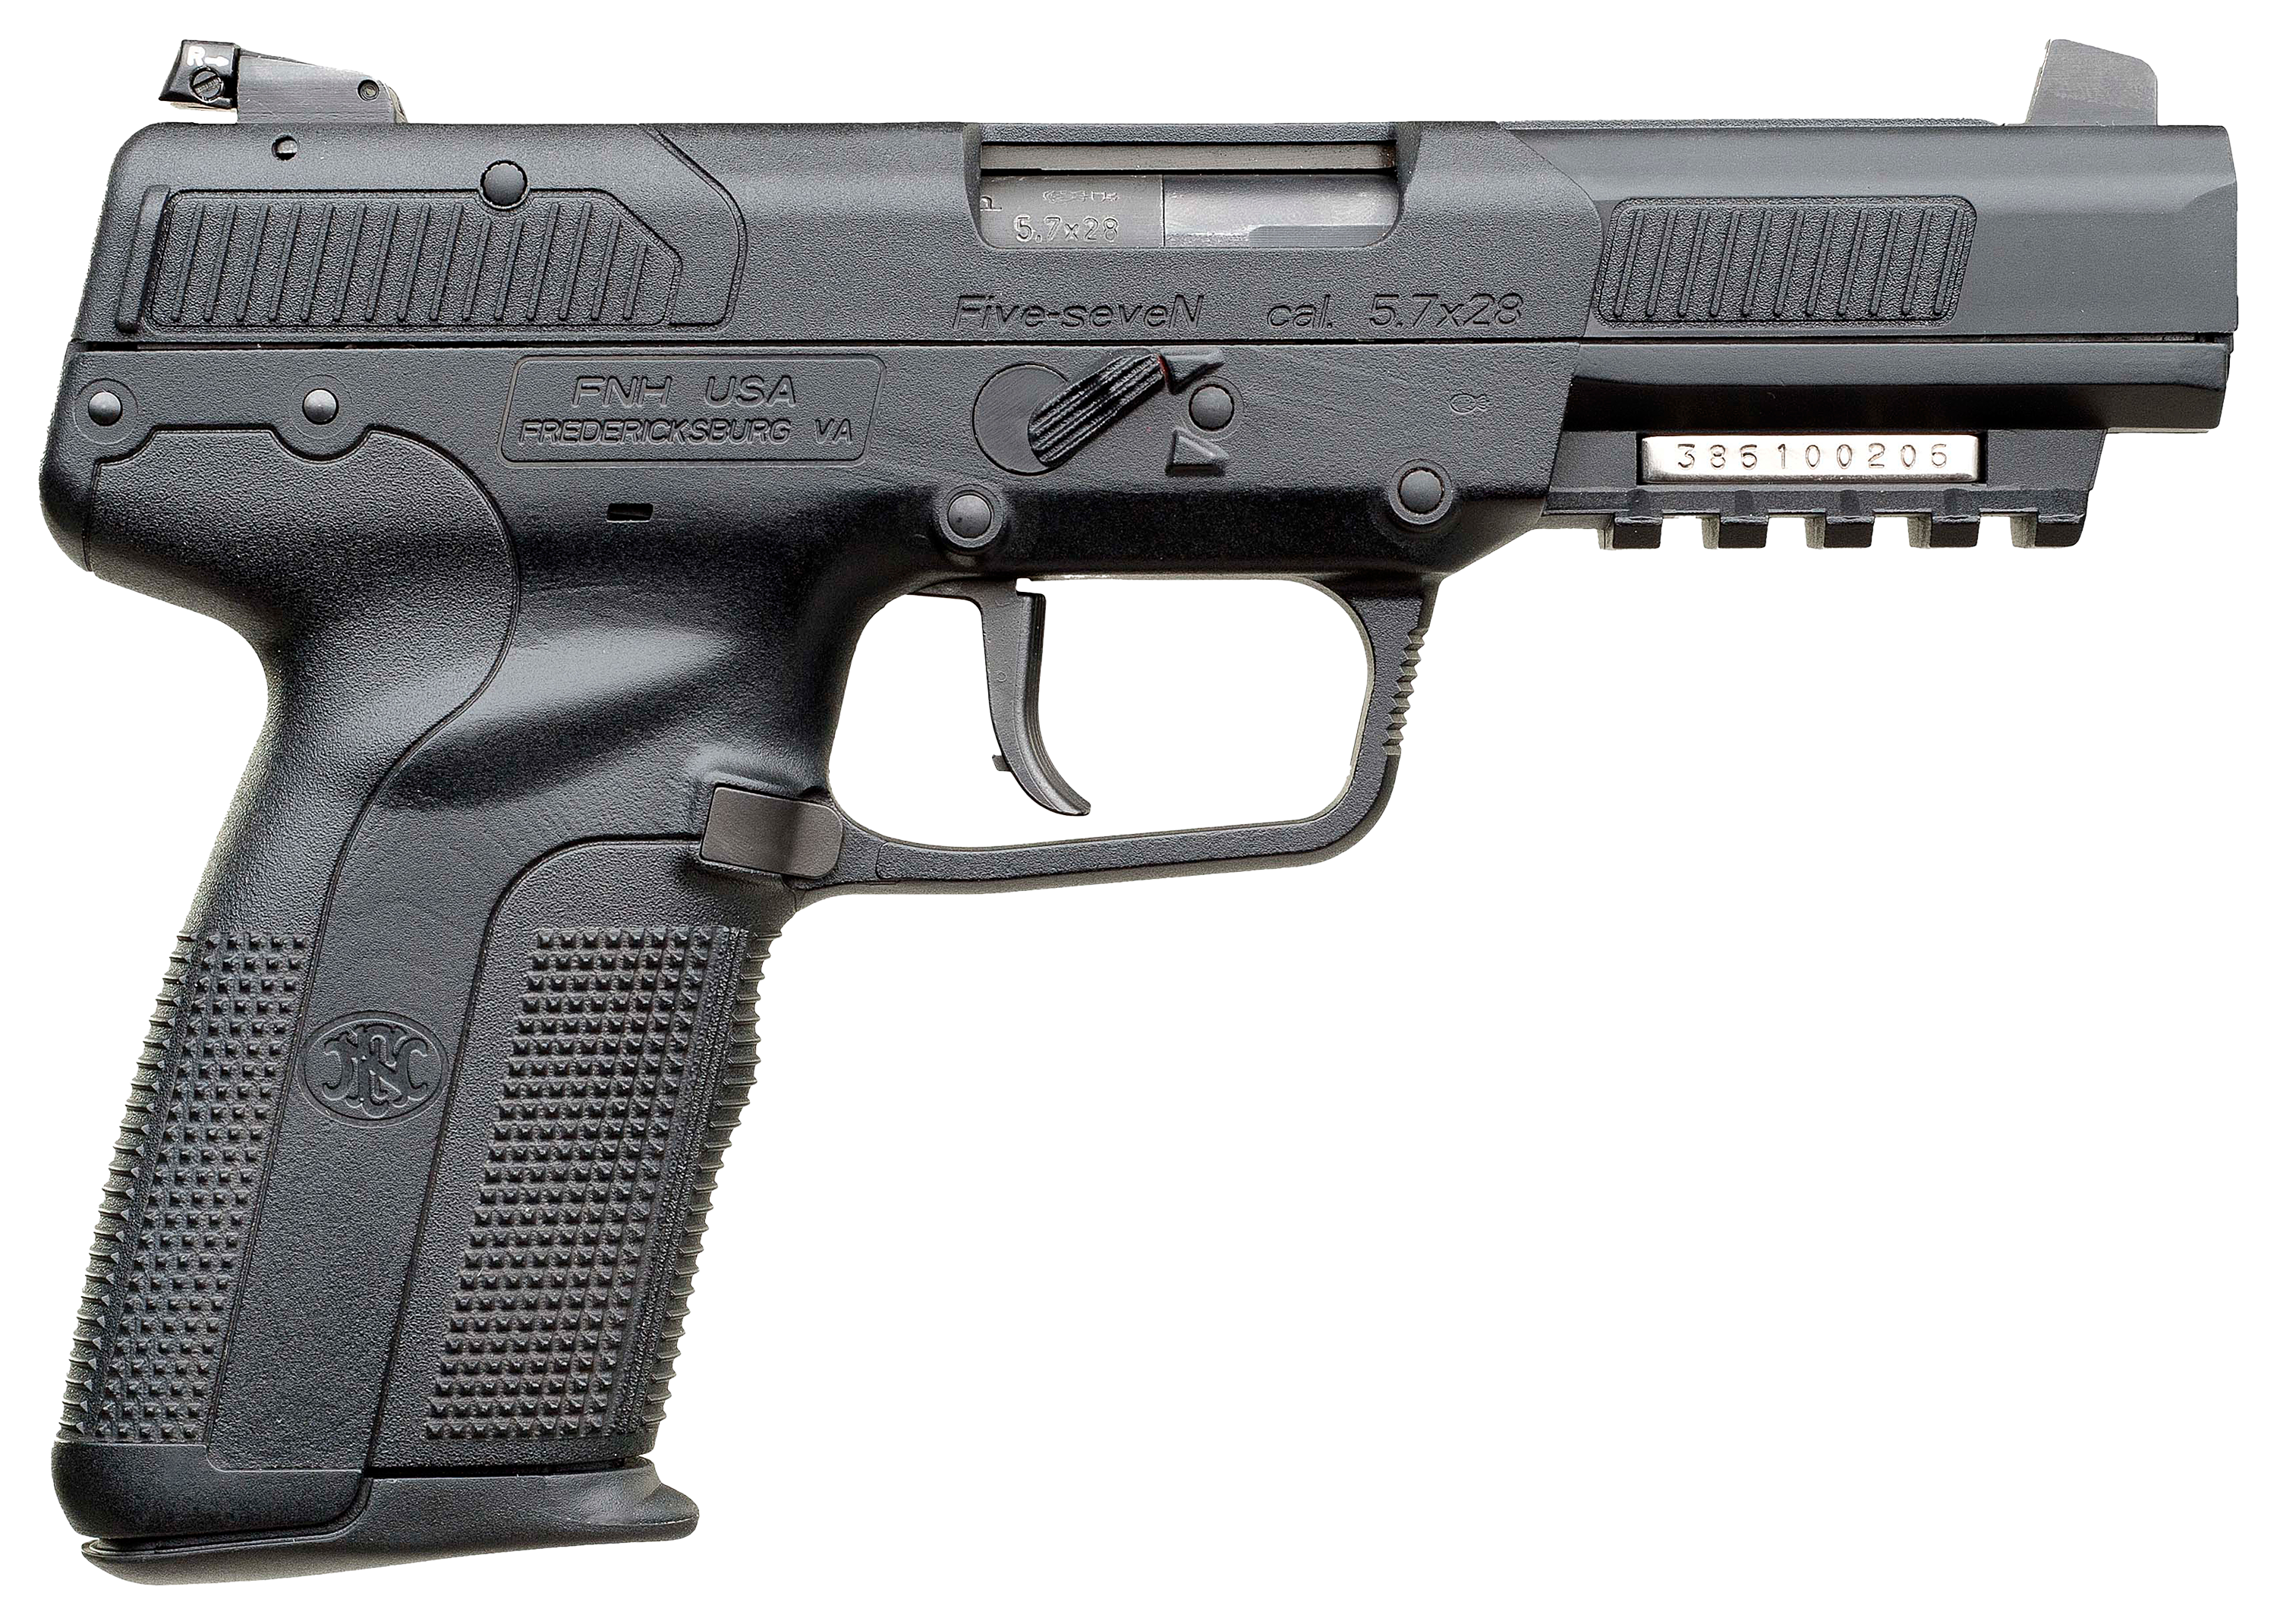 FN 509c Compact Tactical Semi-Auto Pistol in FDE with Vortex Viper Micro  Red Dot Sight Package